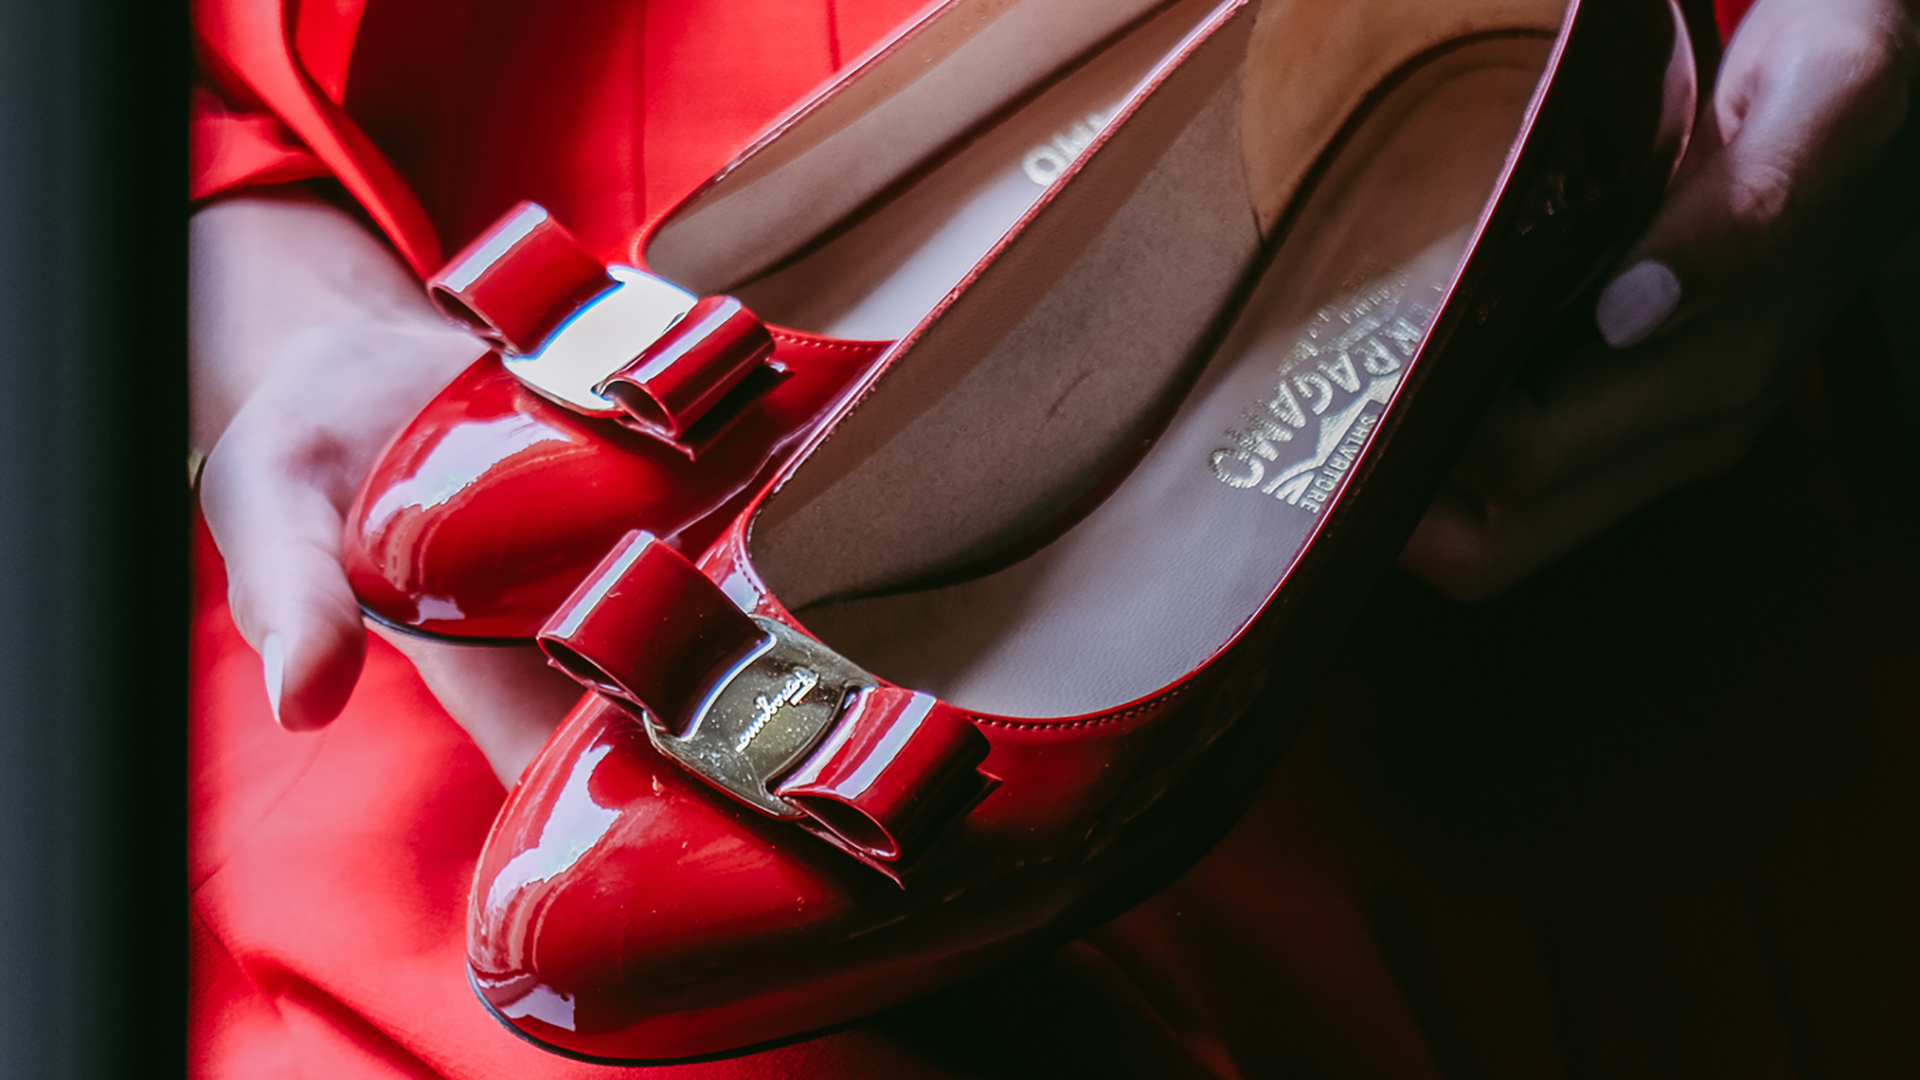 MANIFESTO - ICONIC CUSTOMISED FOOTWEAR CATERS TO THE WFH EXPERIENCE: Salvatore  Ferragamo's Tramezza – Future of Craft